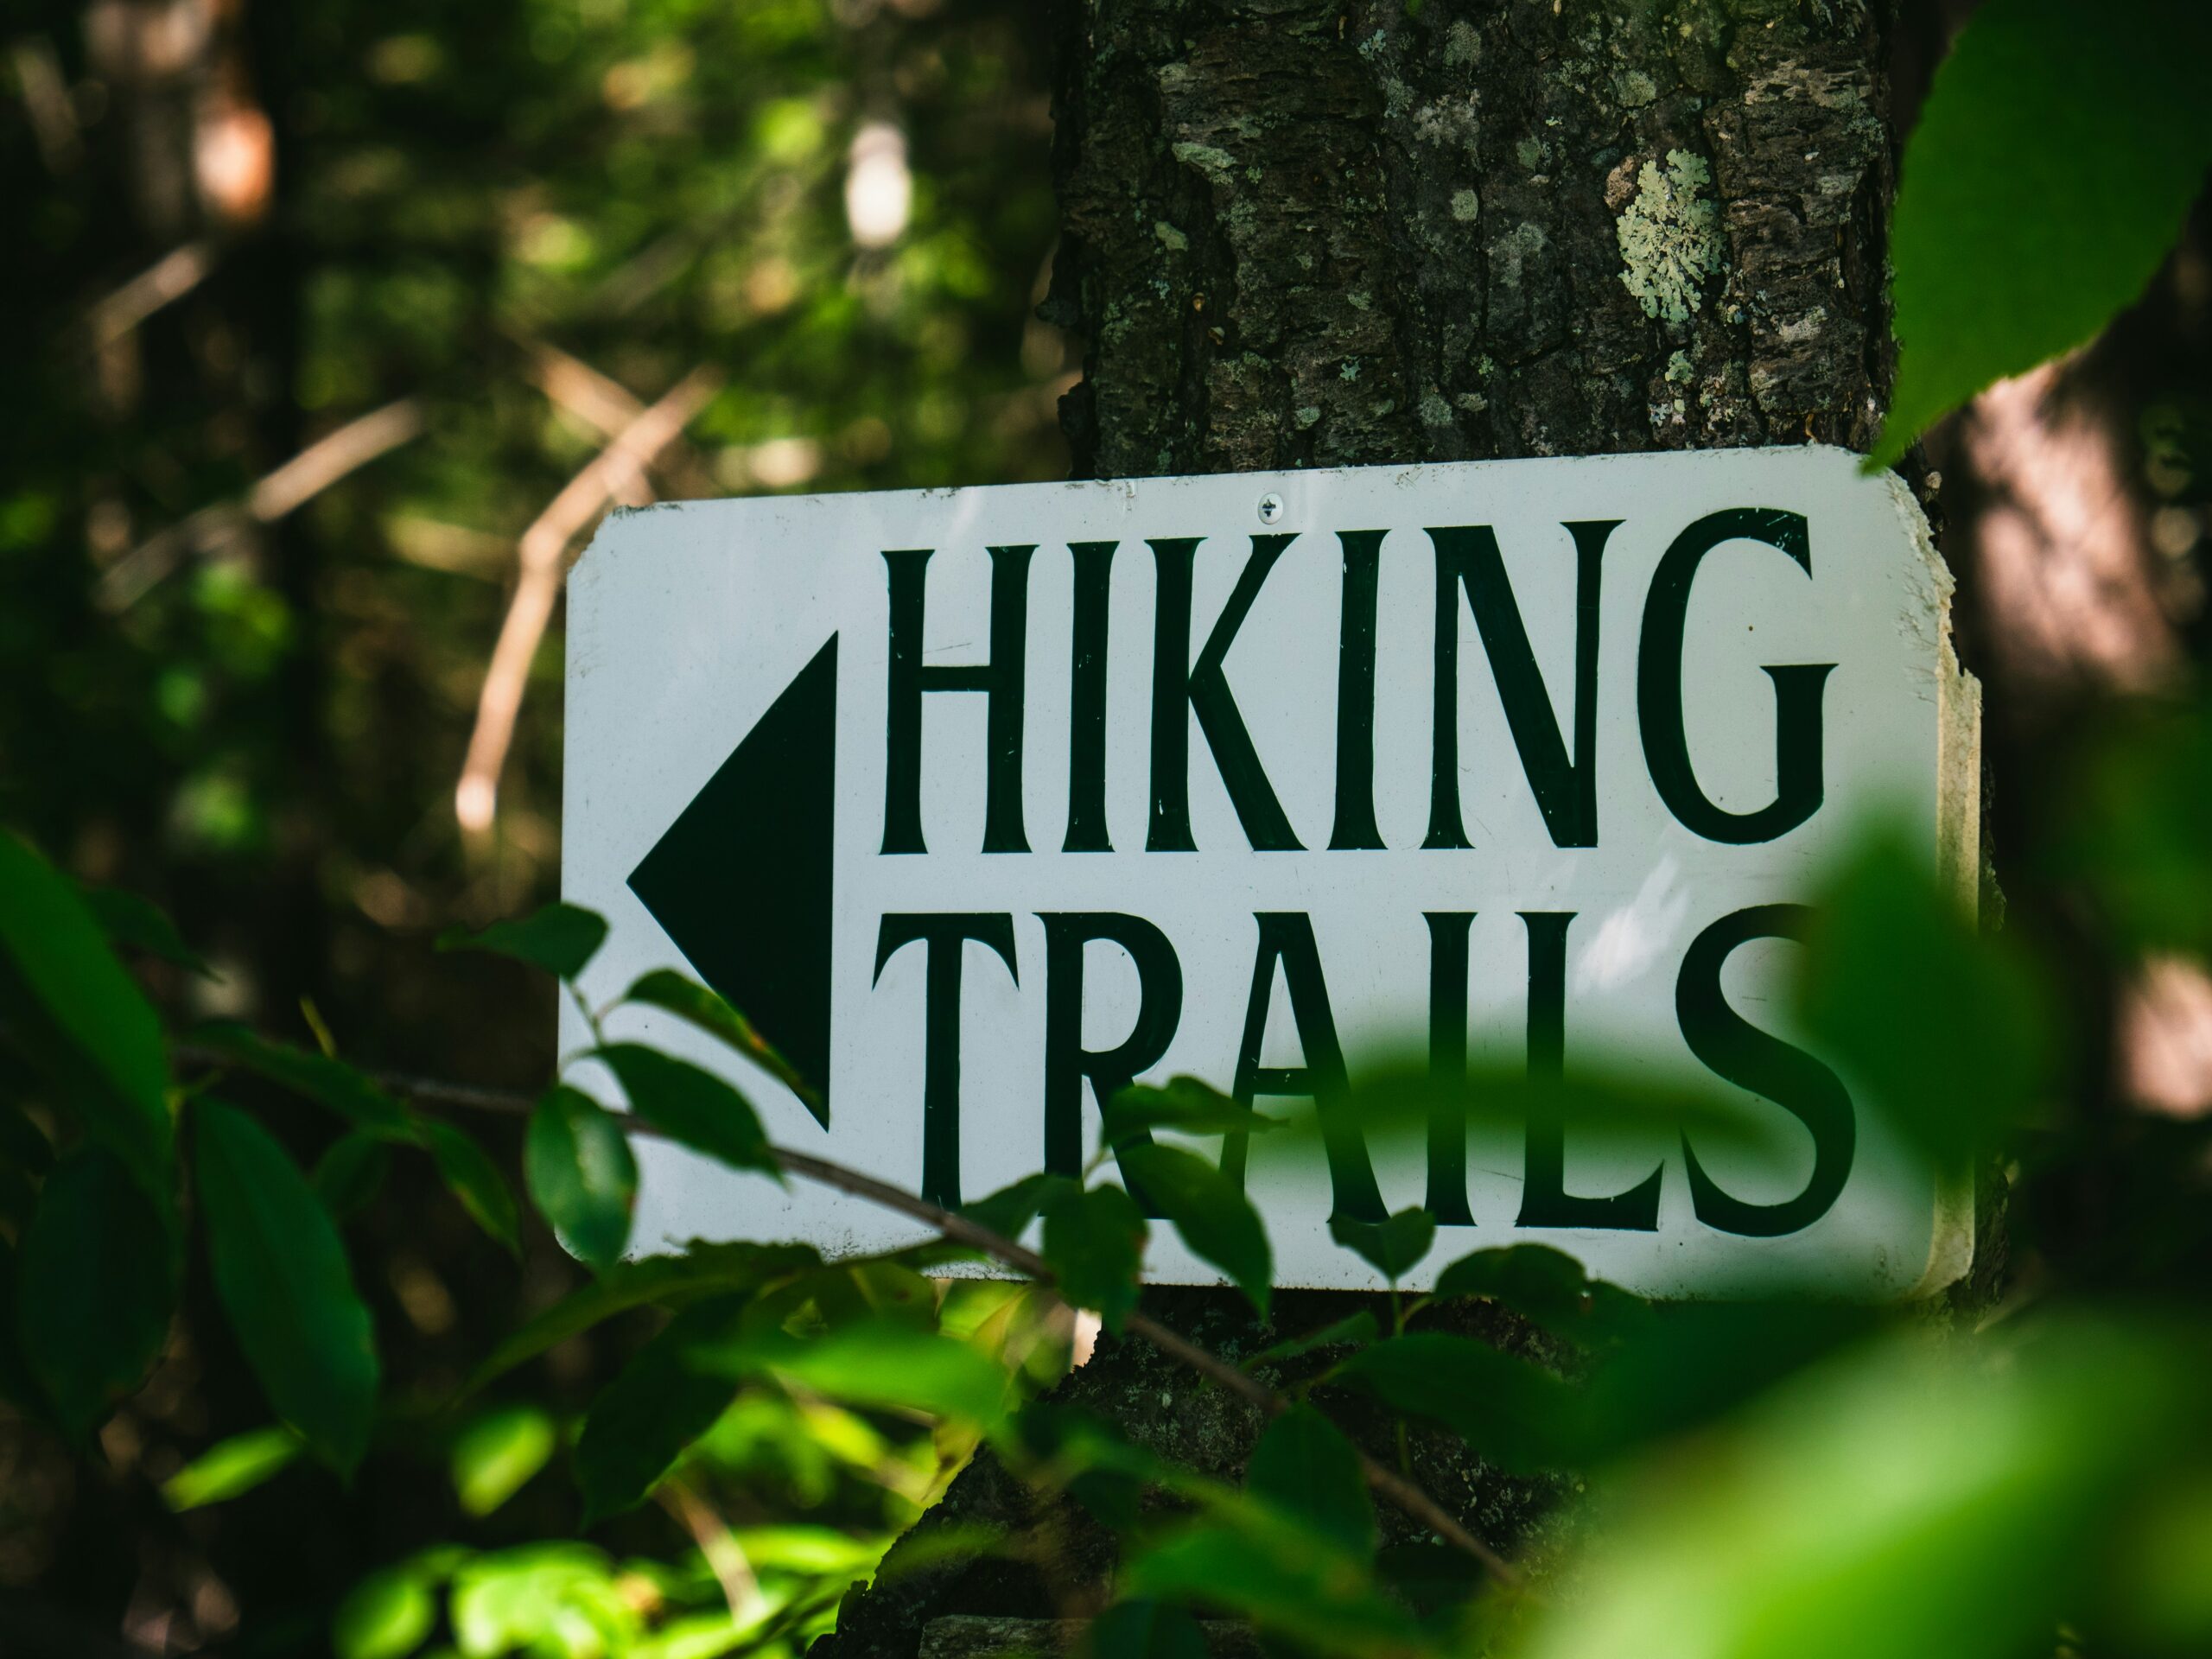 Are There Any Hiking Trails Suitable For Beginners On Mount Shasta?